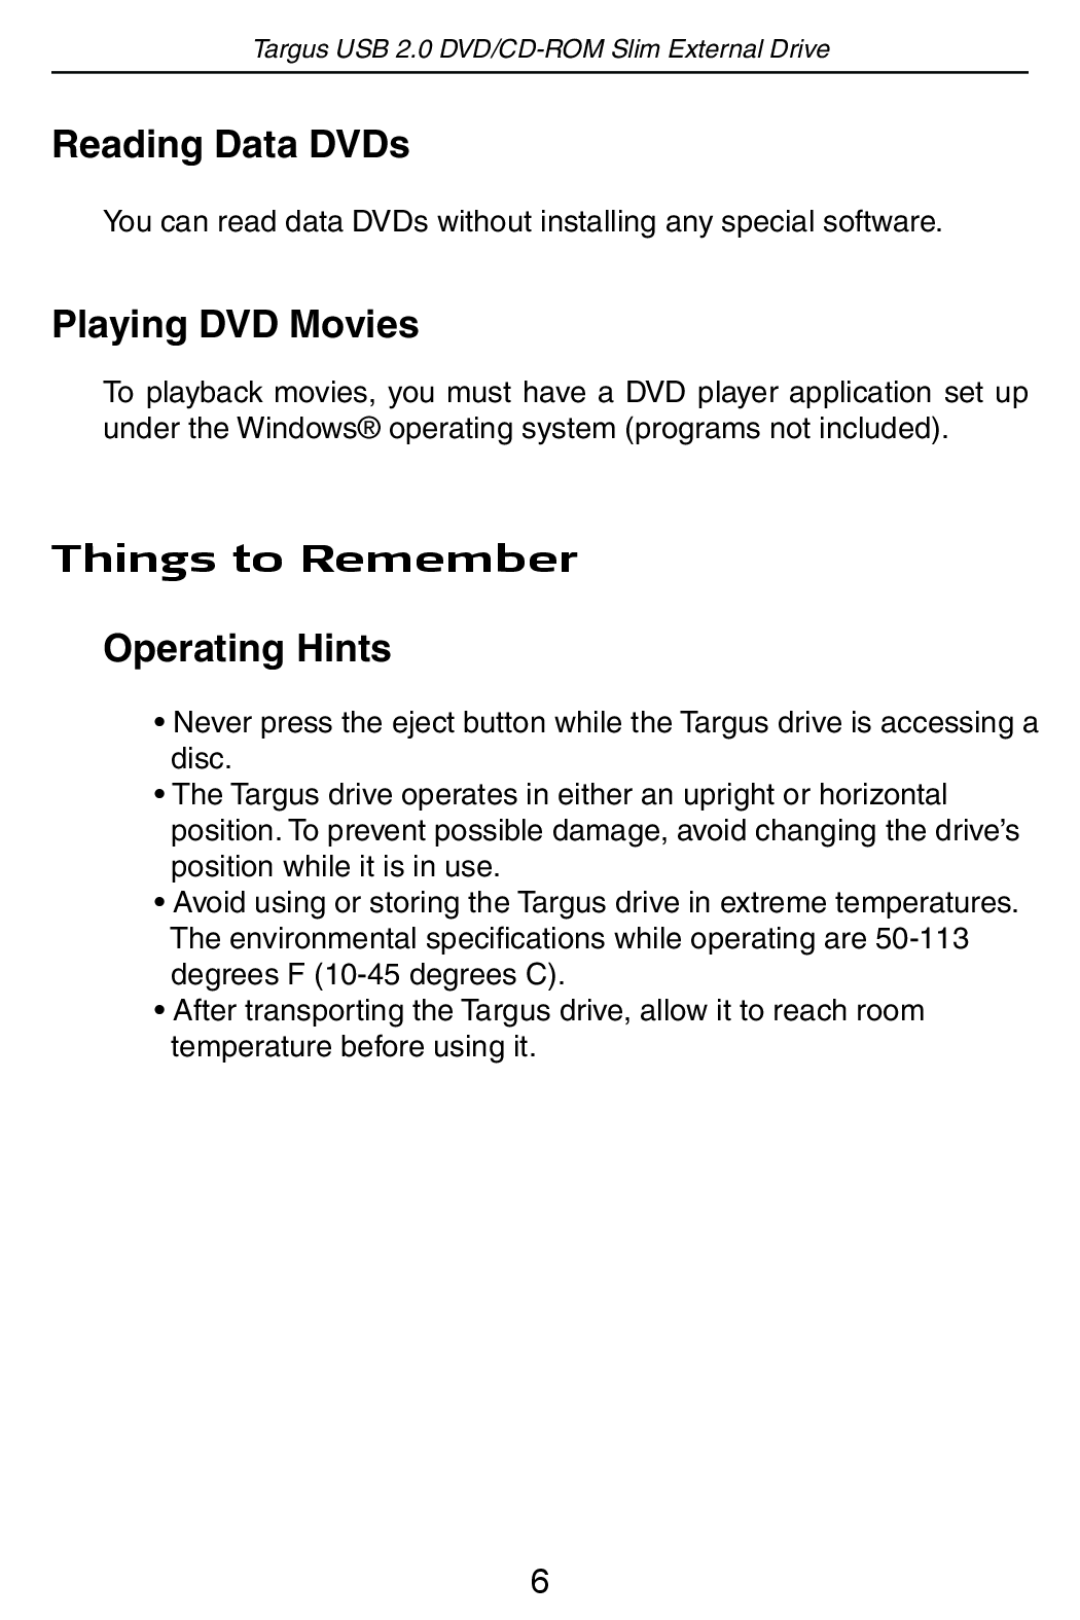 Targus USB 2.0 DVD/CD-ROM Slim External Drive Reading Data DVDs, Playing DVD Movies, Things to Remember, Operating Hints 